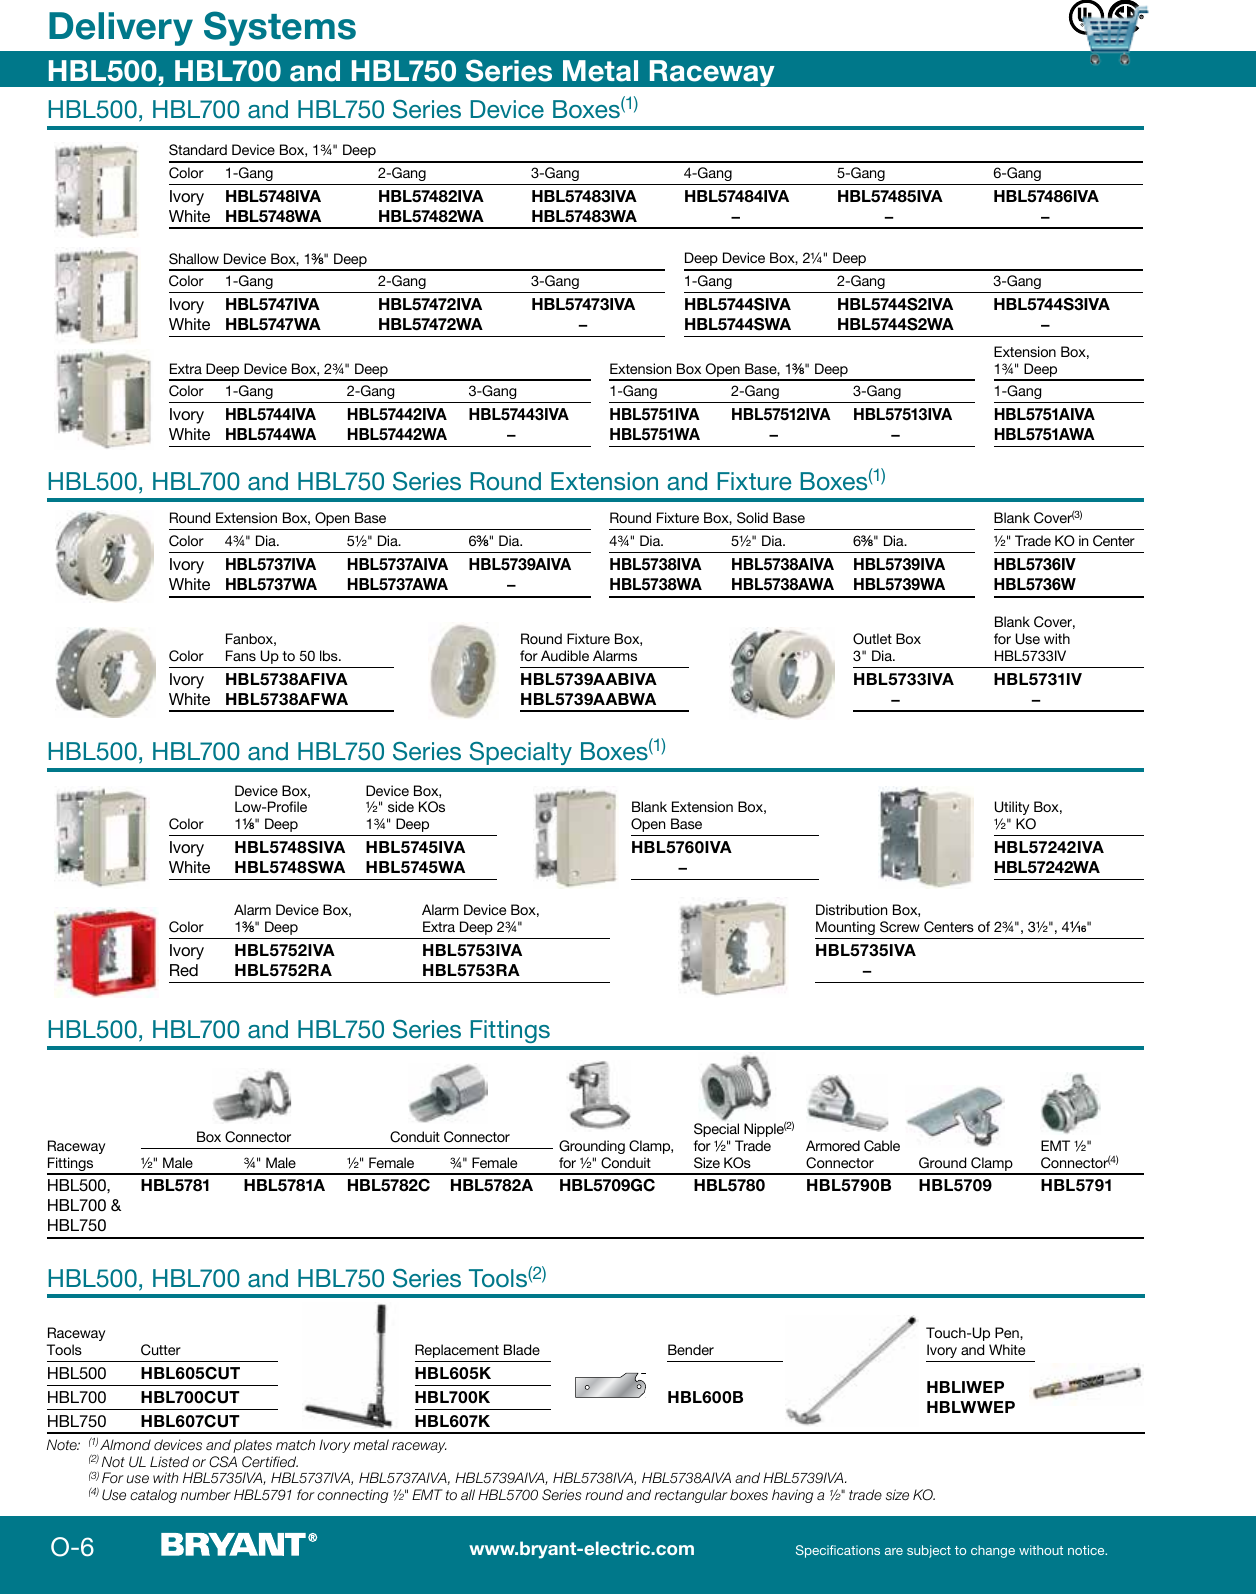 Page 6 of 12 - 1000293193-Catalog